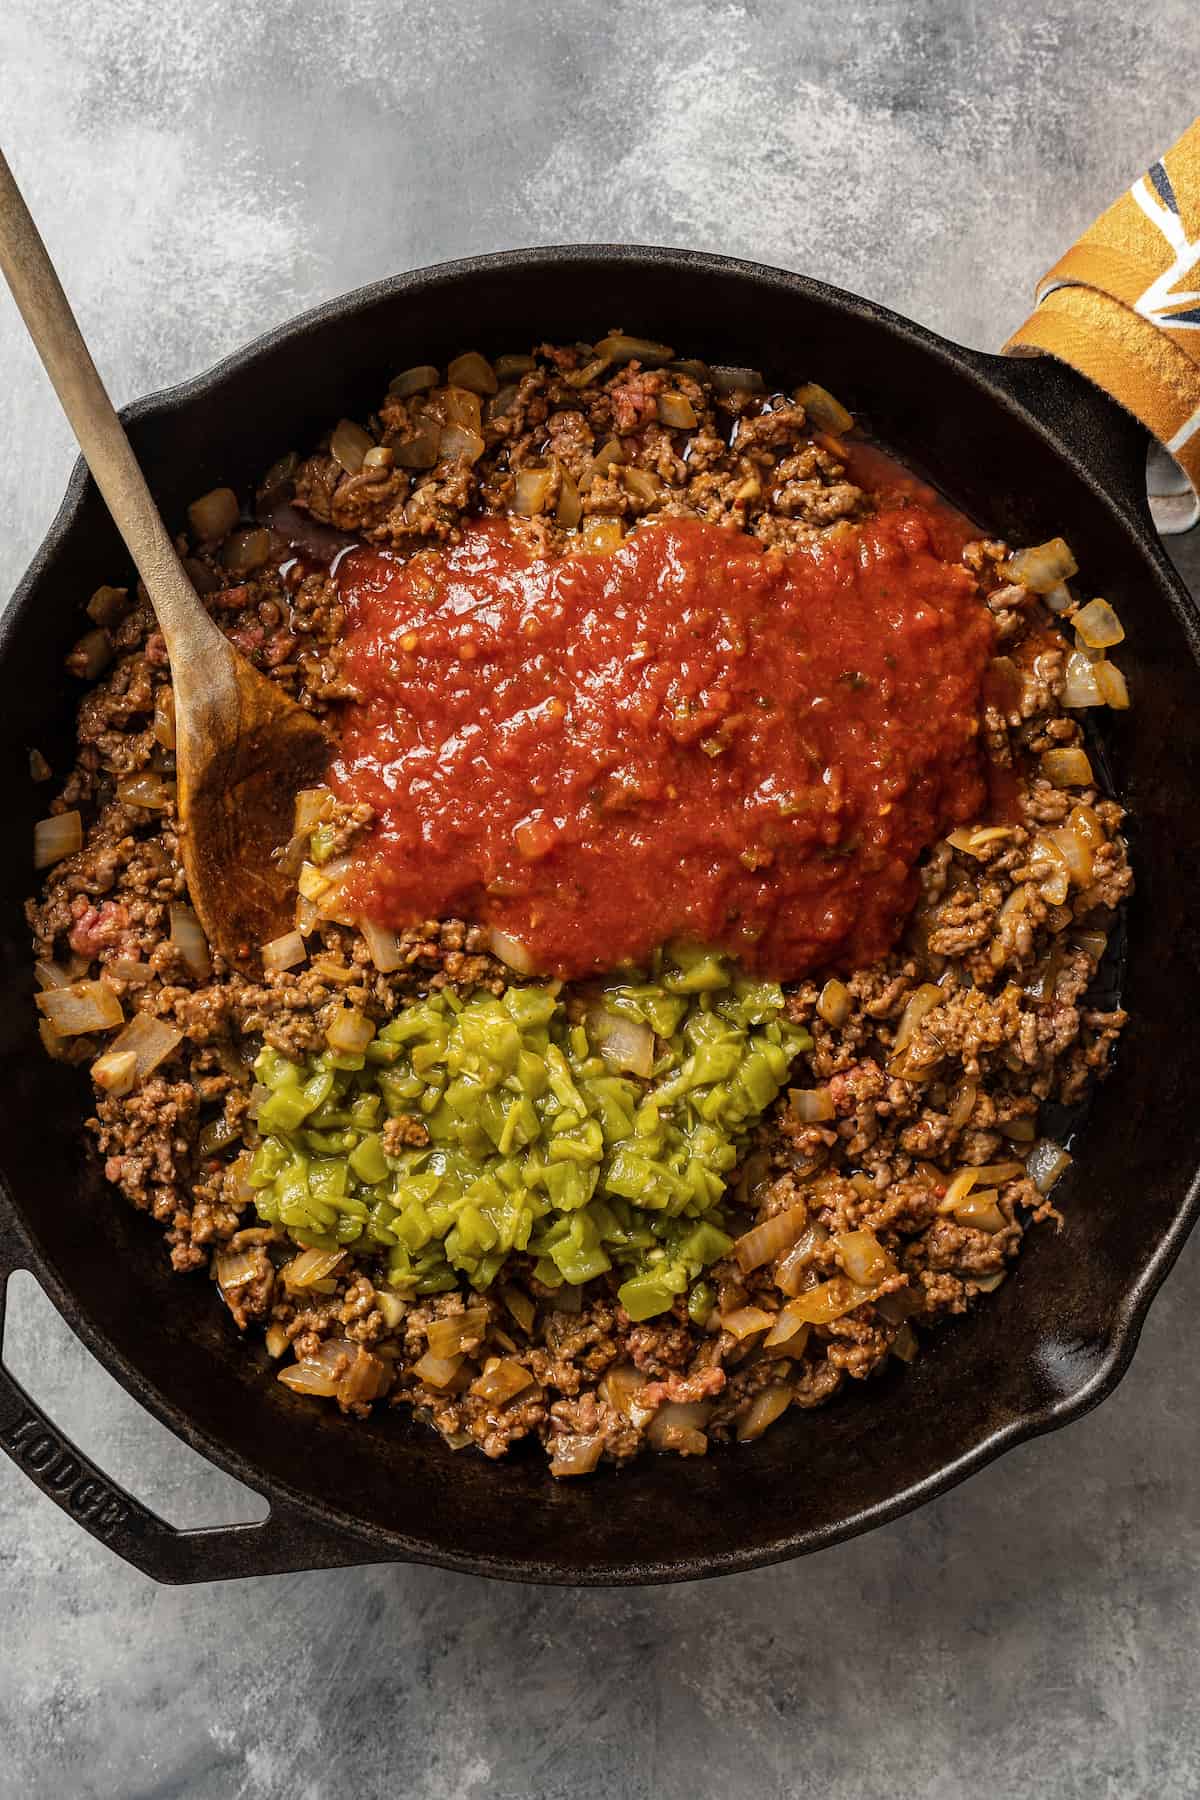 Adding salsa and canned diced green chilis to browned grownd beef in a skillet.